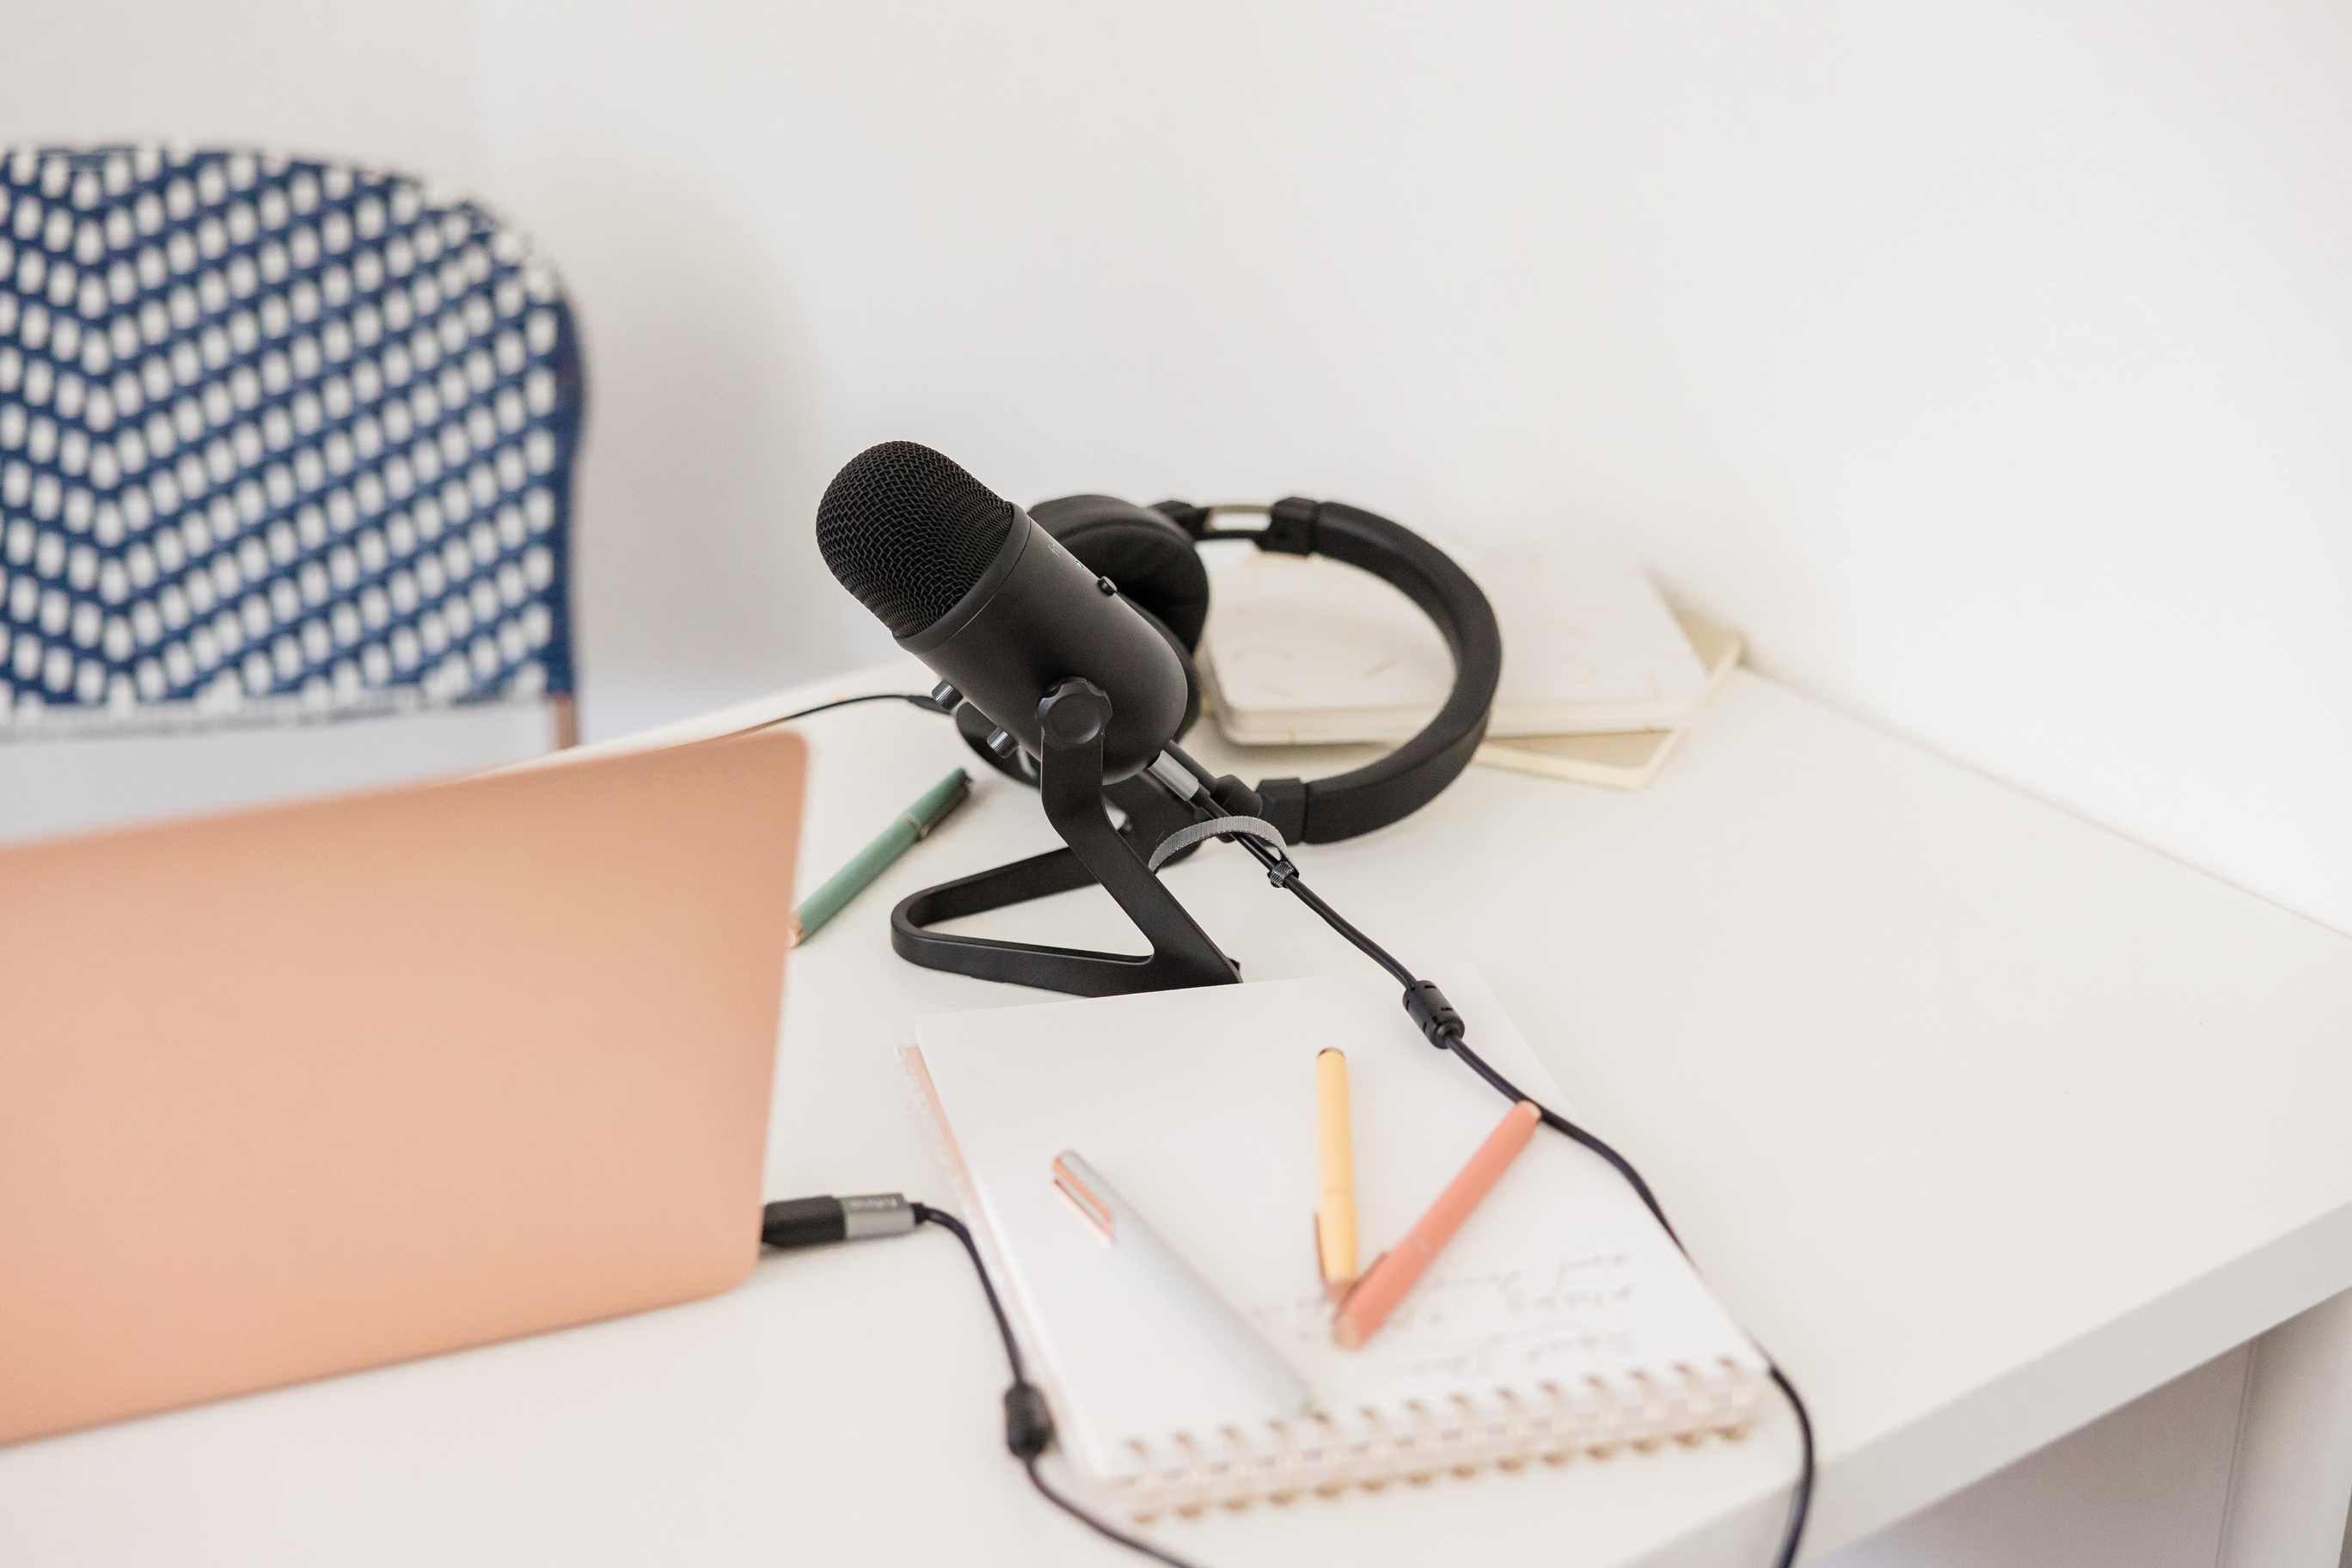 Microphone and Laptop on Table with Stationery